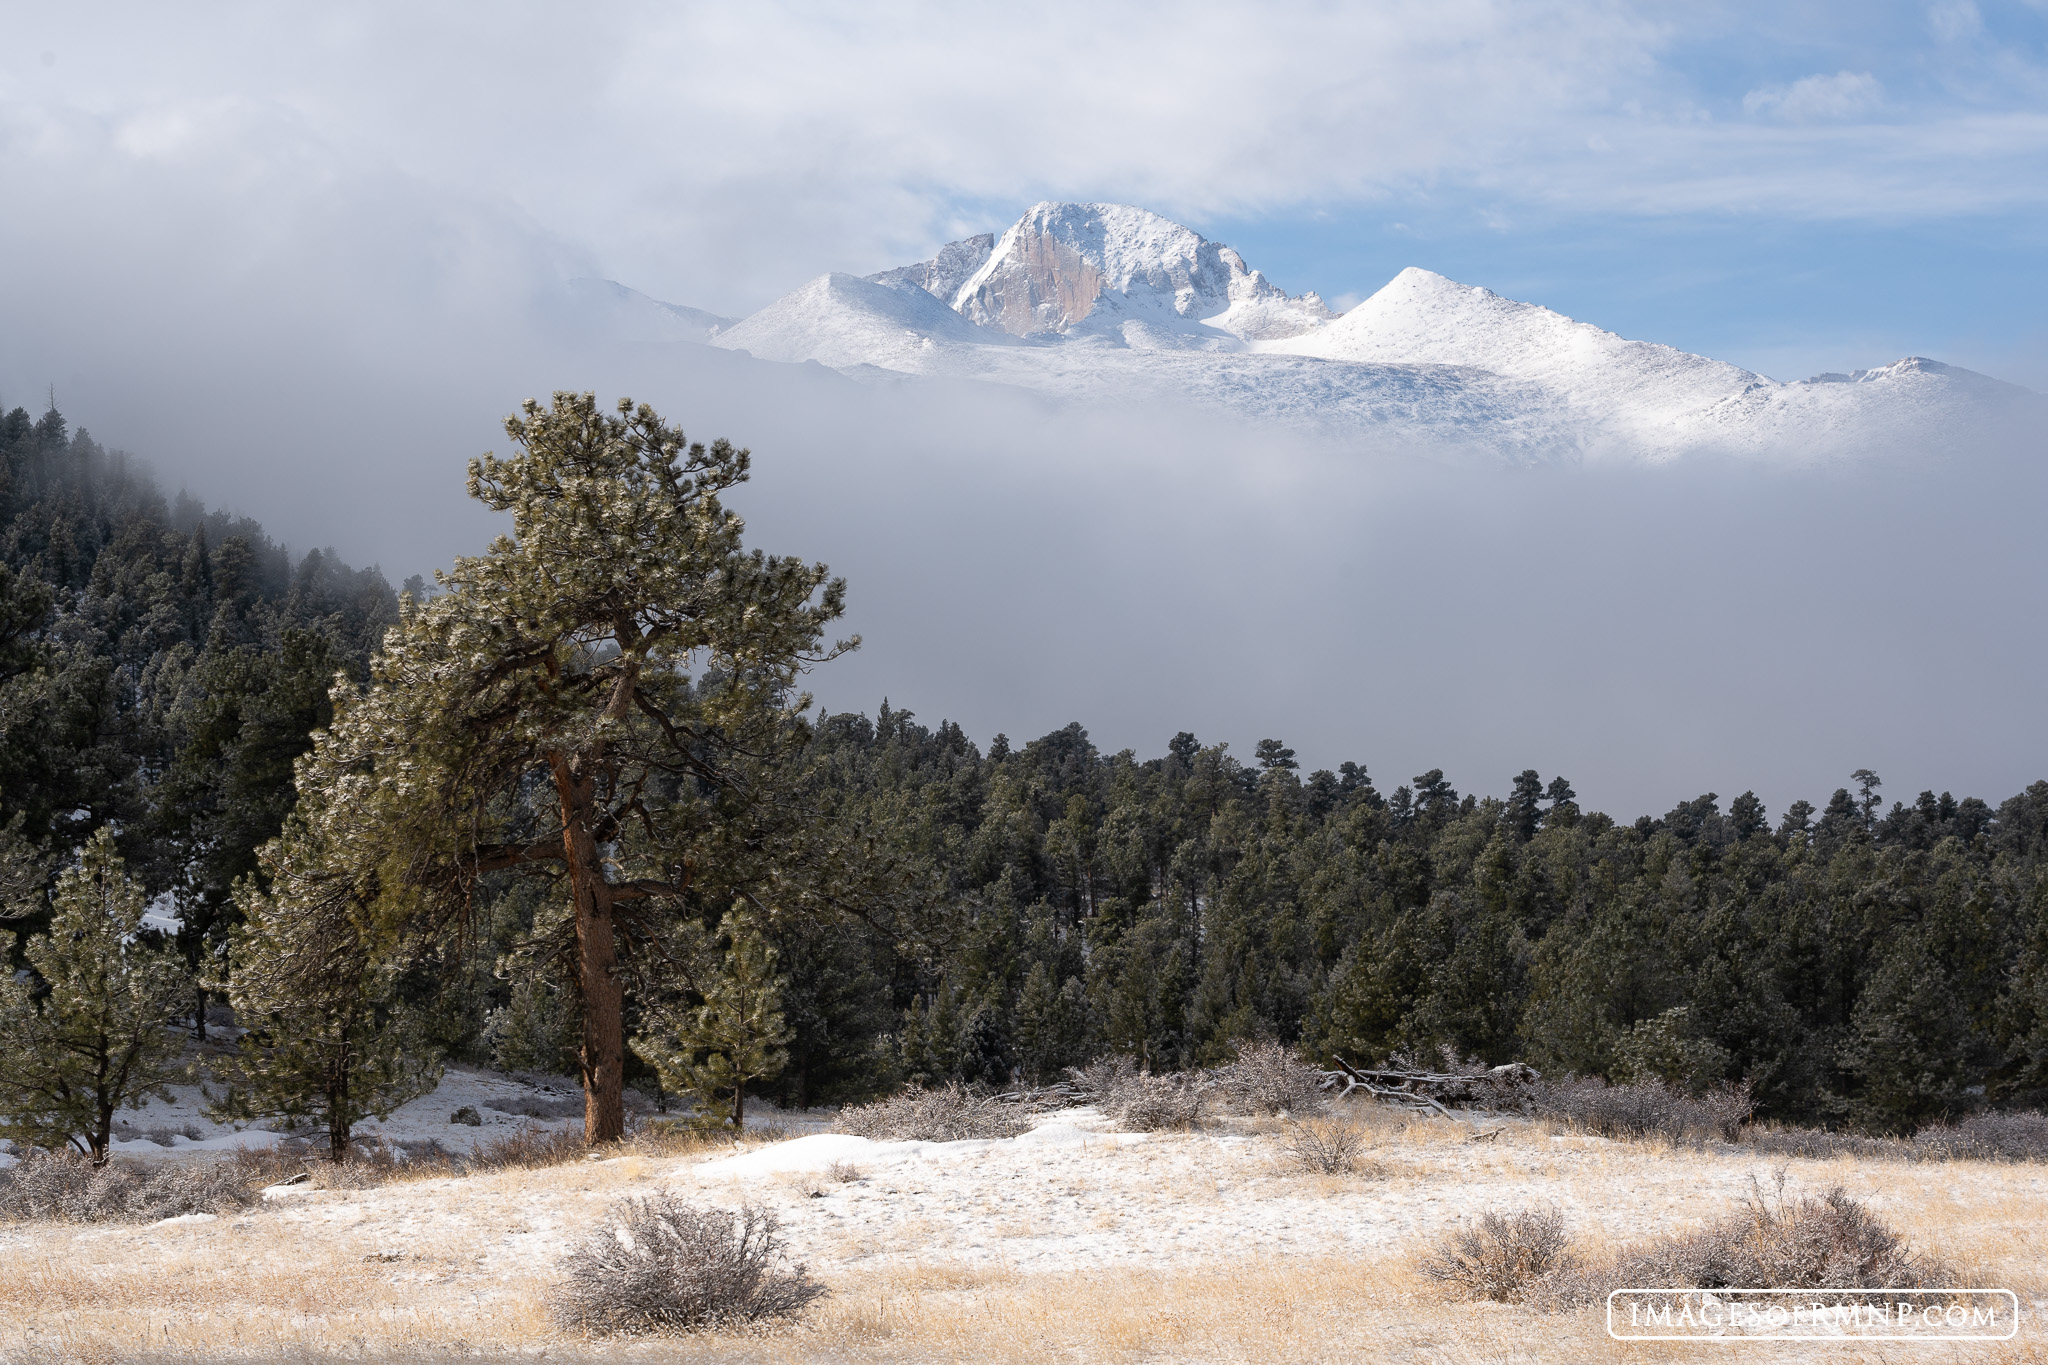 Longs Peak appears briefly as a winter storm begins to move up from the valley and into the national park. Just 24 hours later...